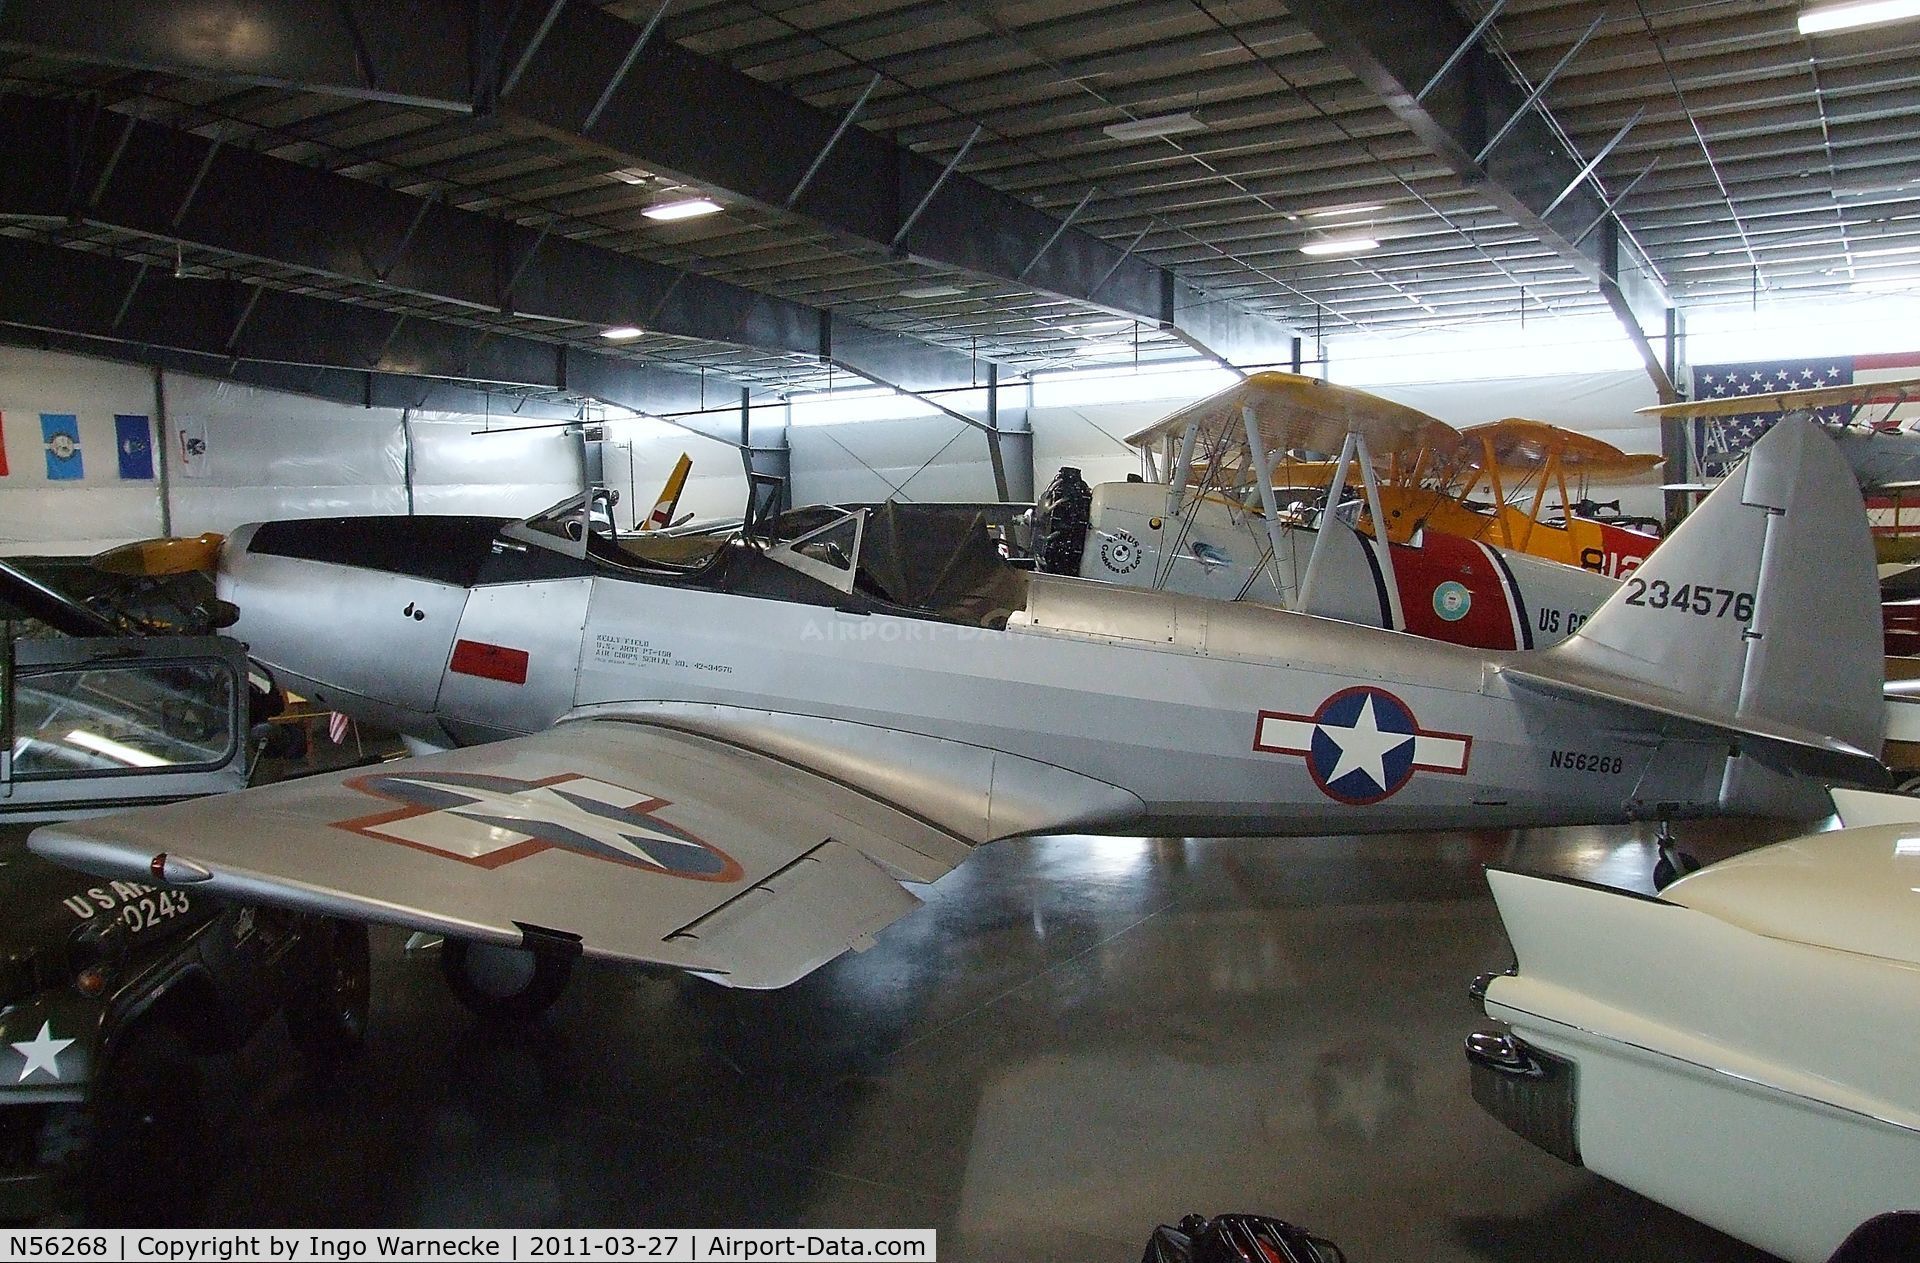 N56268, 1943 Fairchild M-62A C/N T43-5242, Fairchild M-62A (PT-19) at the Western Antique Aeroplane and Automobile Museum, Hood River OR